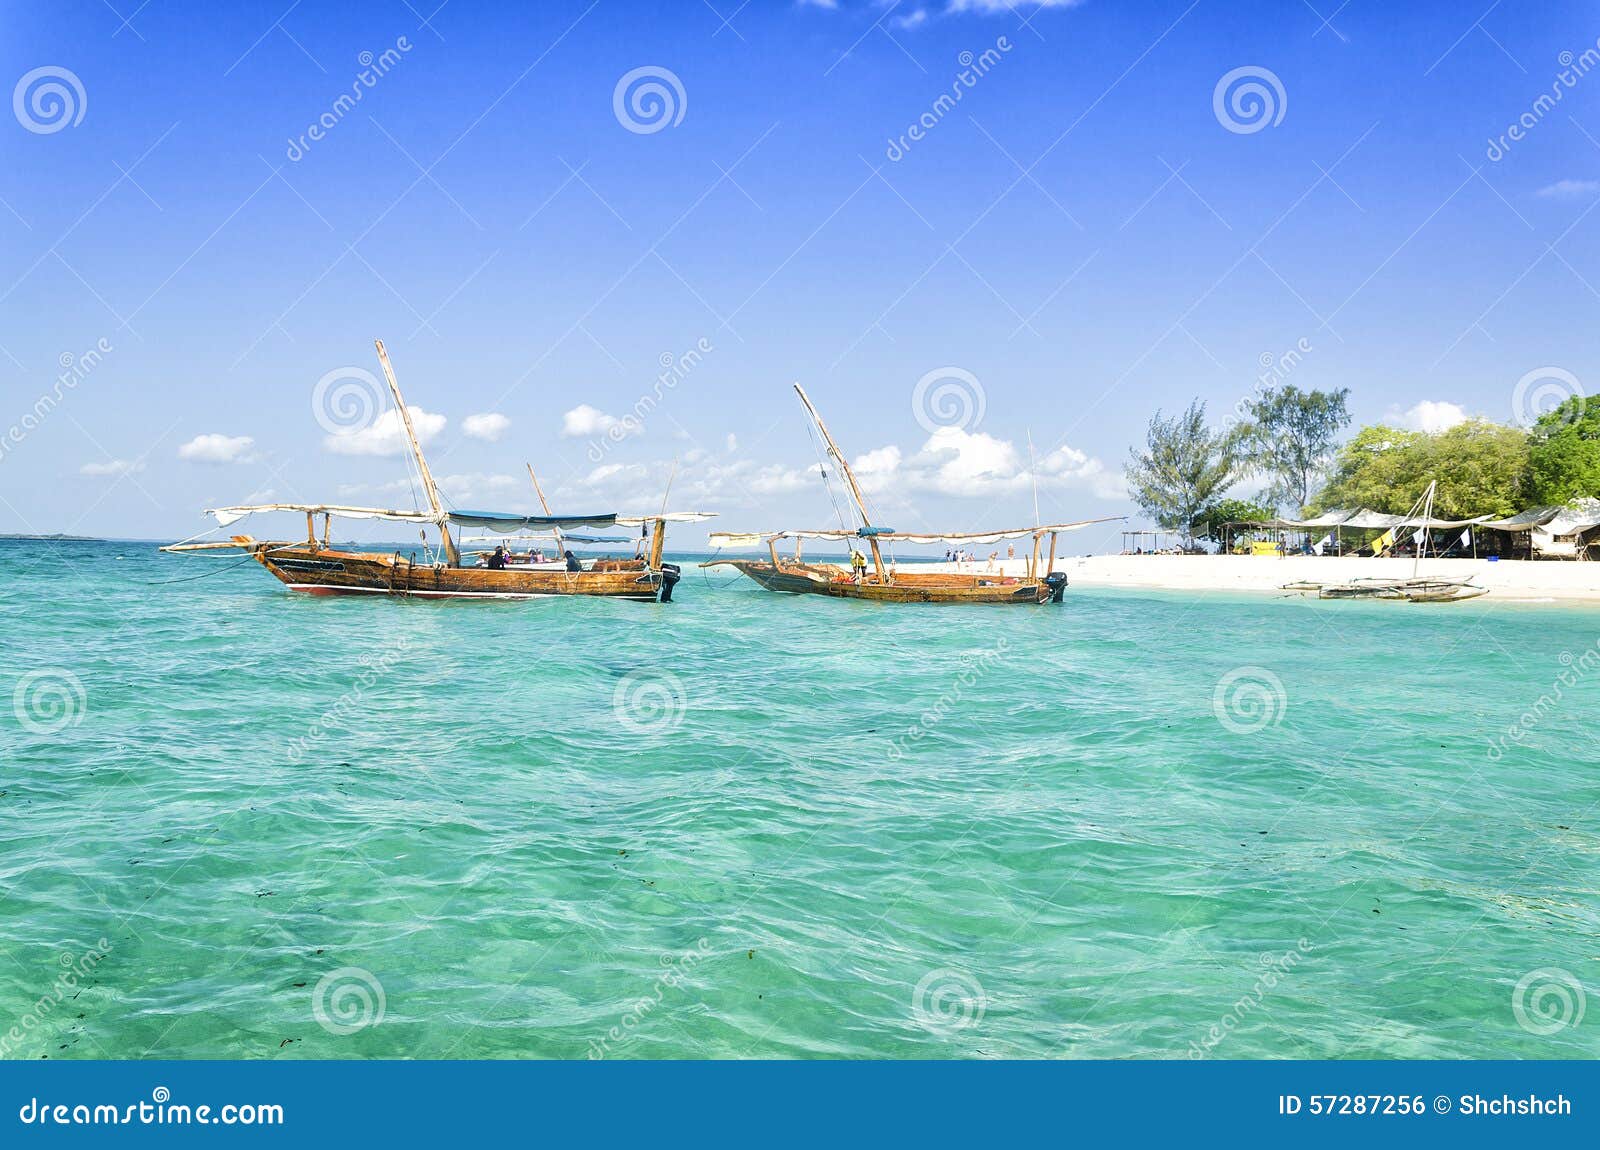 boats on the island